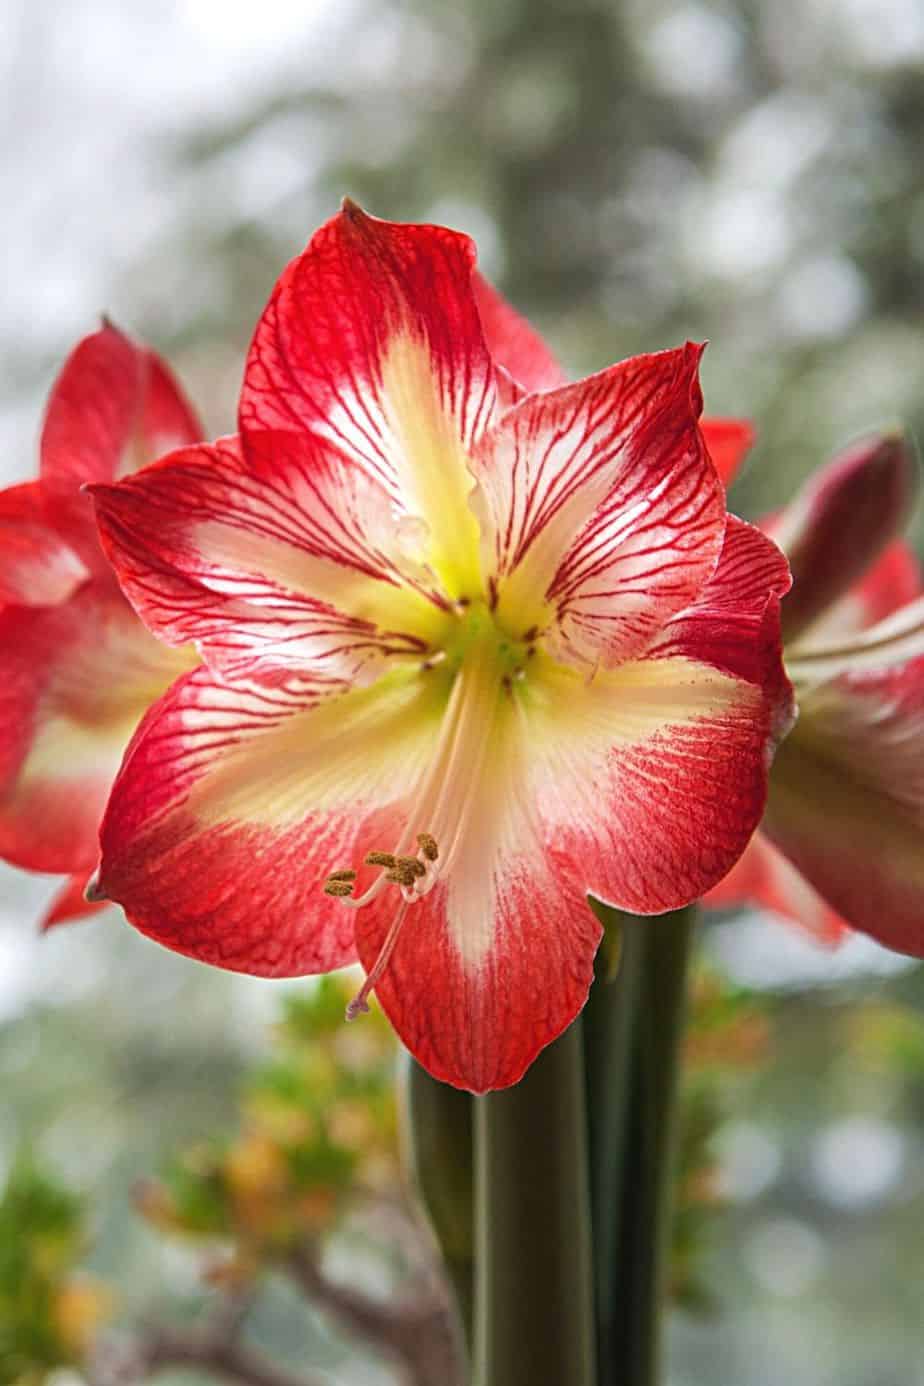 Despite the beautiful red flowers that Amaryllis grow, it's poisonous for your cats